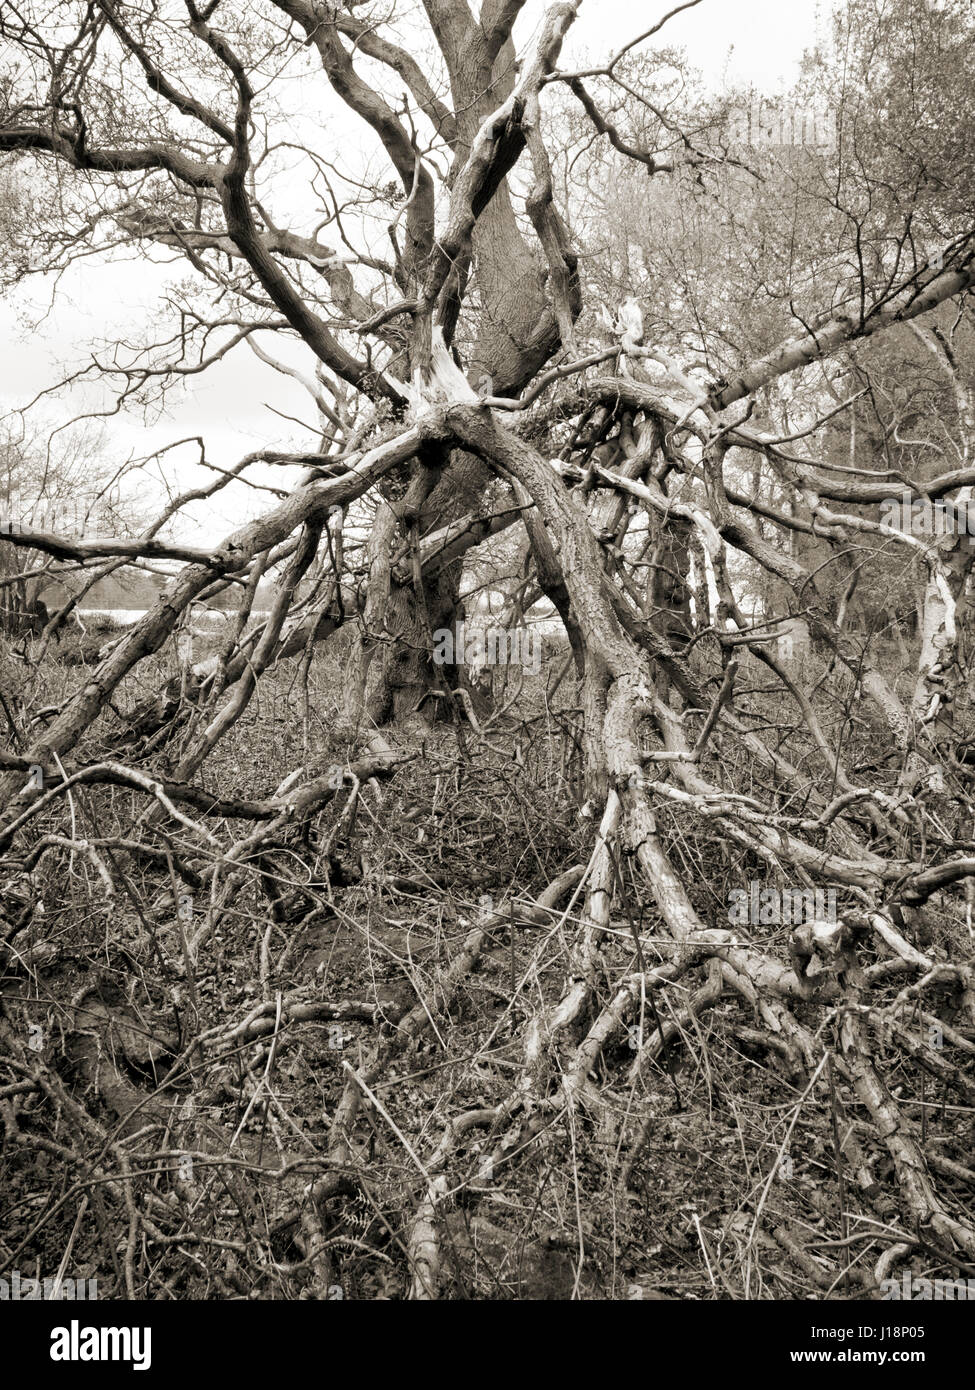 Dead tree with collapsed branches in ancient woodland Stock Photo